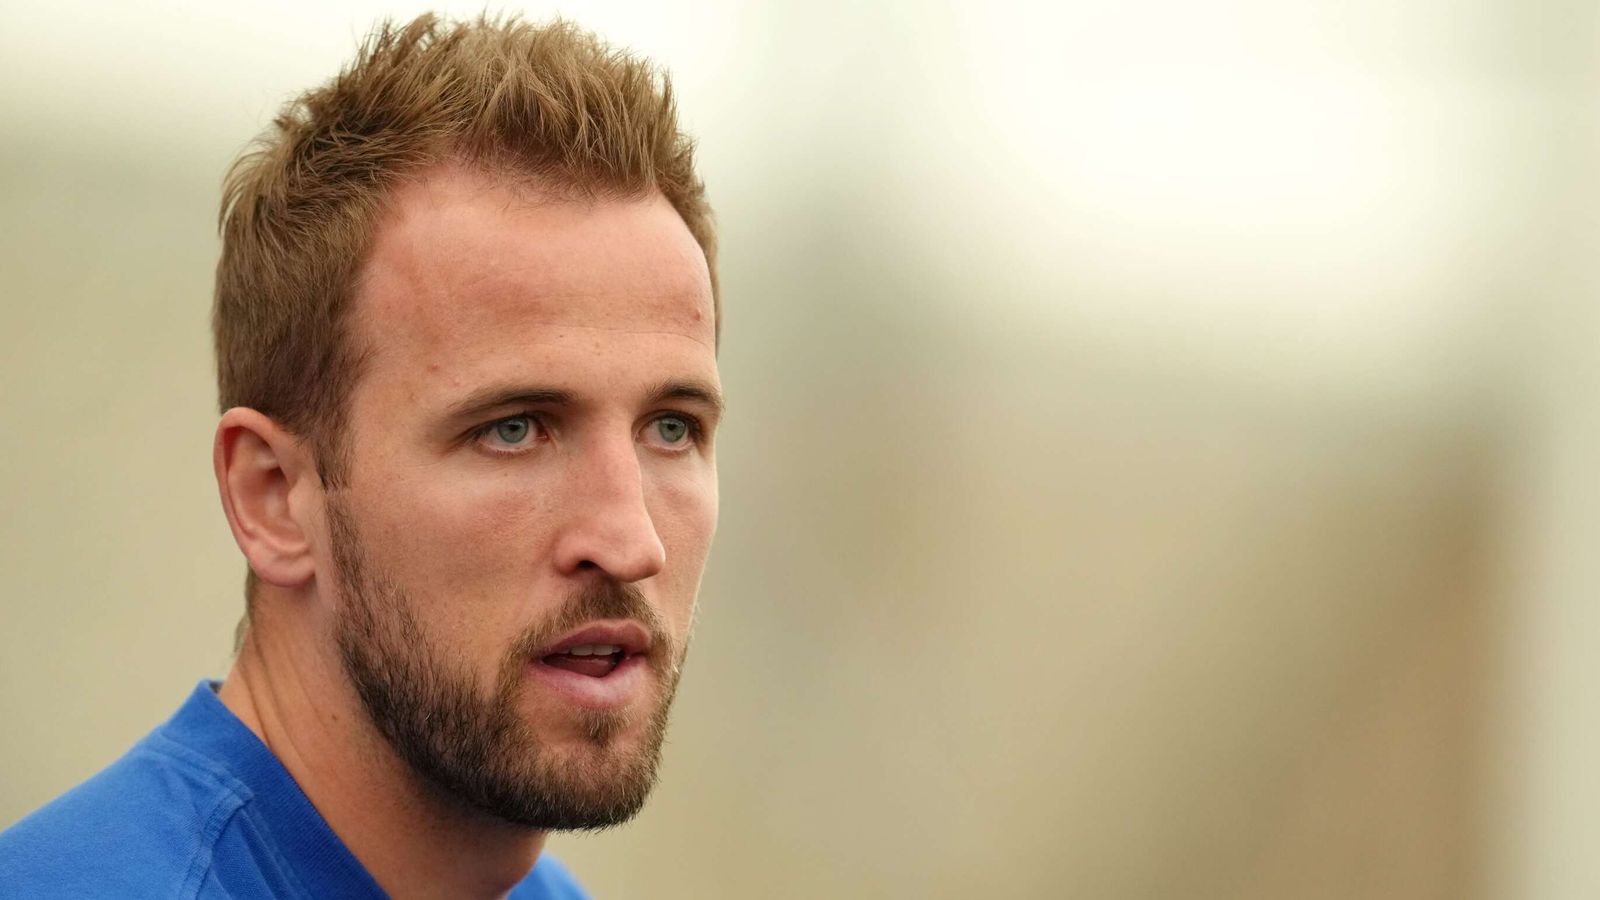 Harry Kane: England captain in discussion with counterparts over Qatar World Cup stance